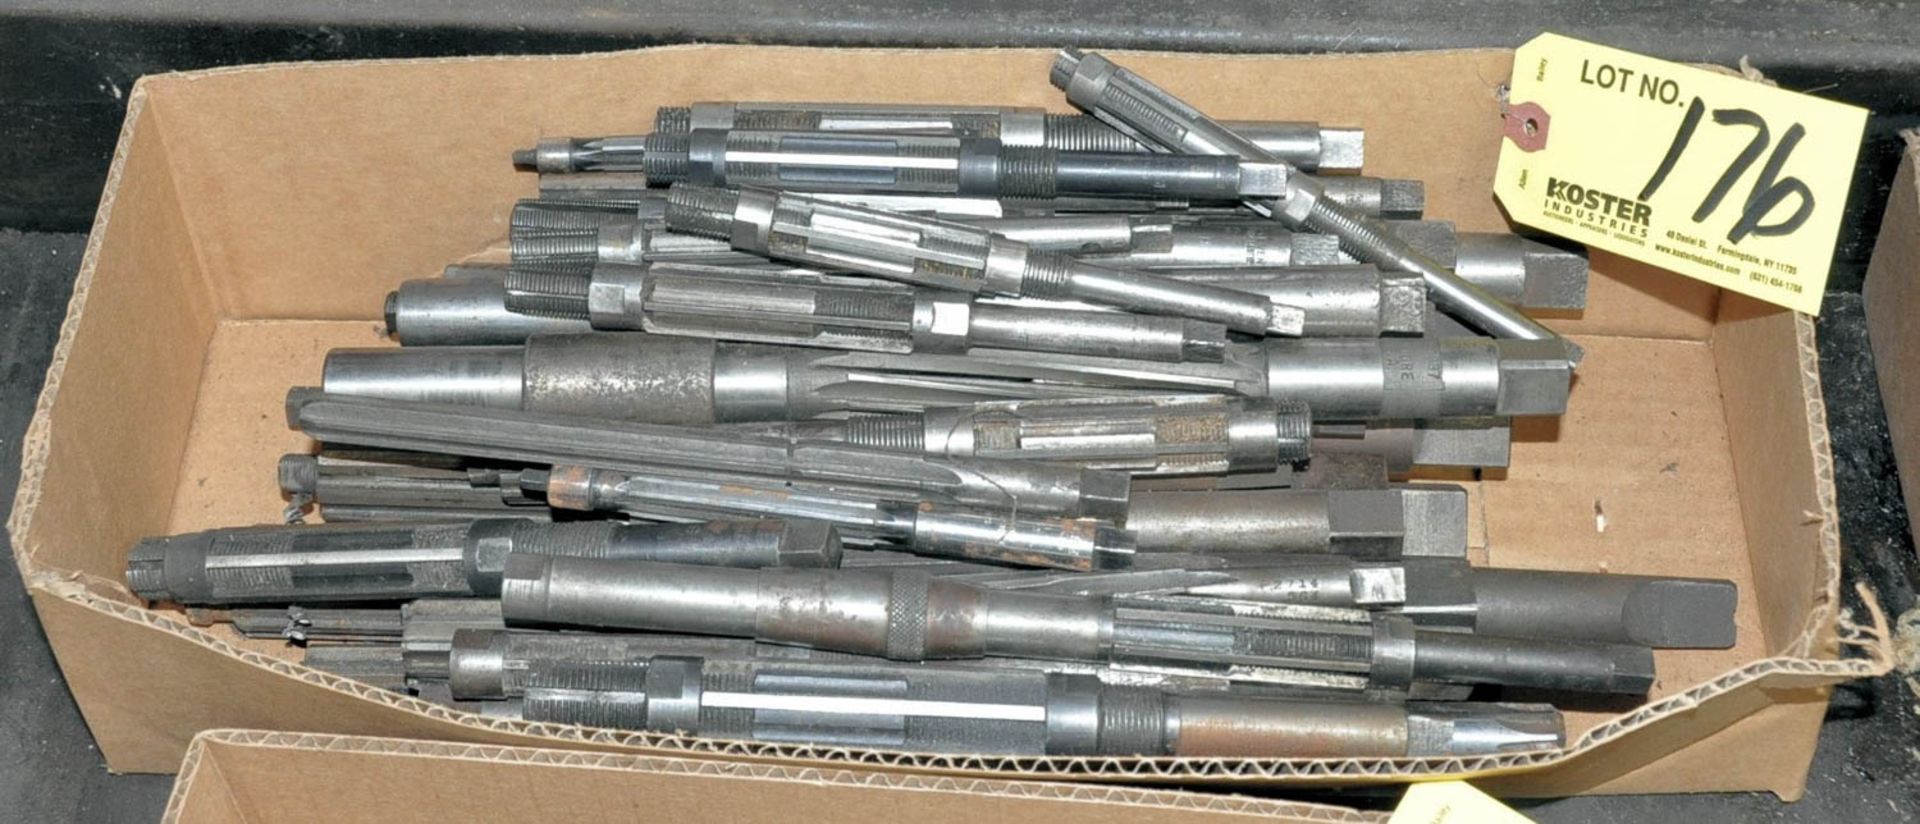 BOX OF EXPANDABLE REAMERS